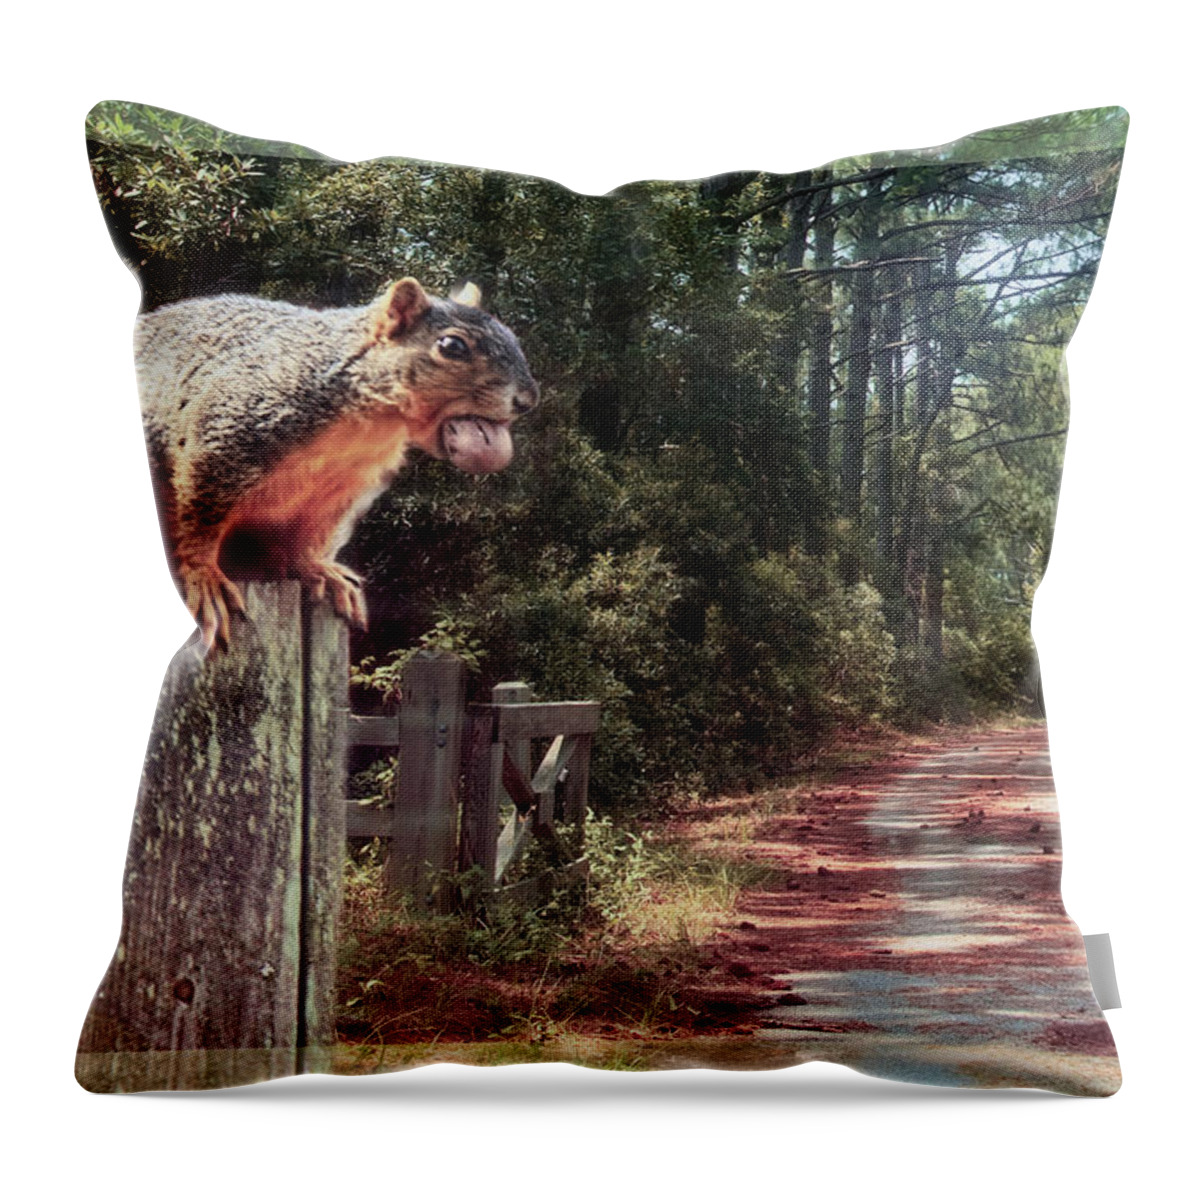 Squirrel Throw Pillow featuring the photograph A Mouth Full by Bonnie Willis